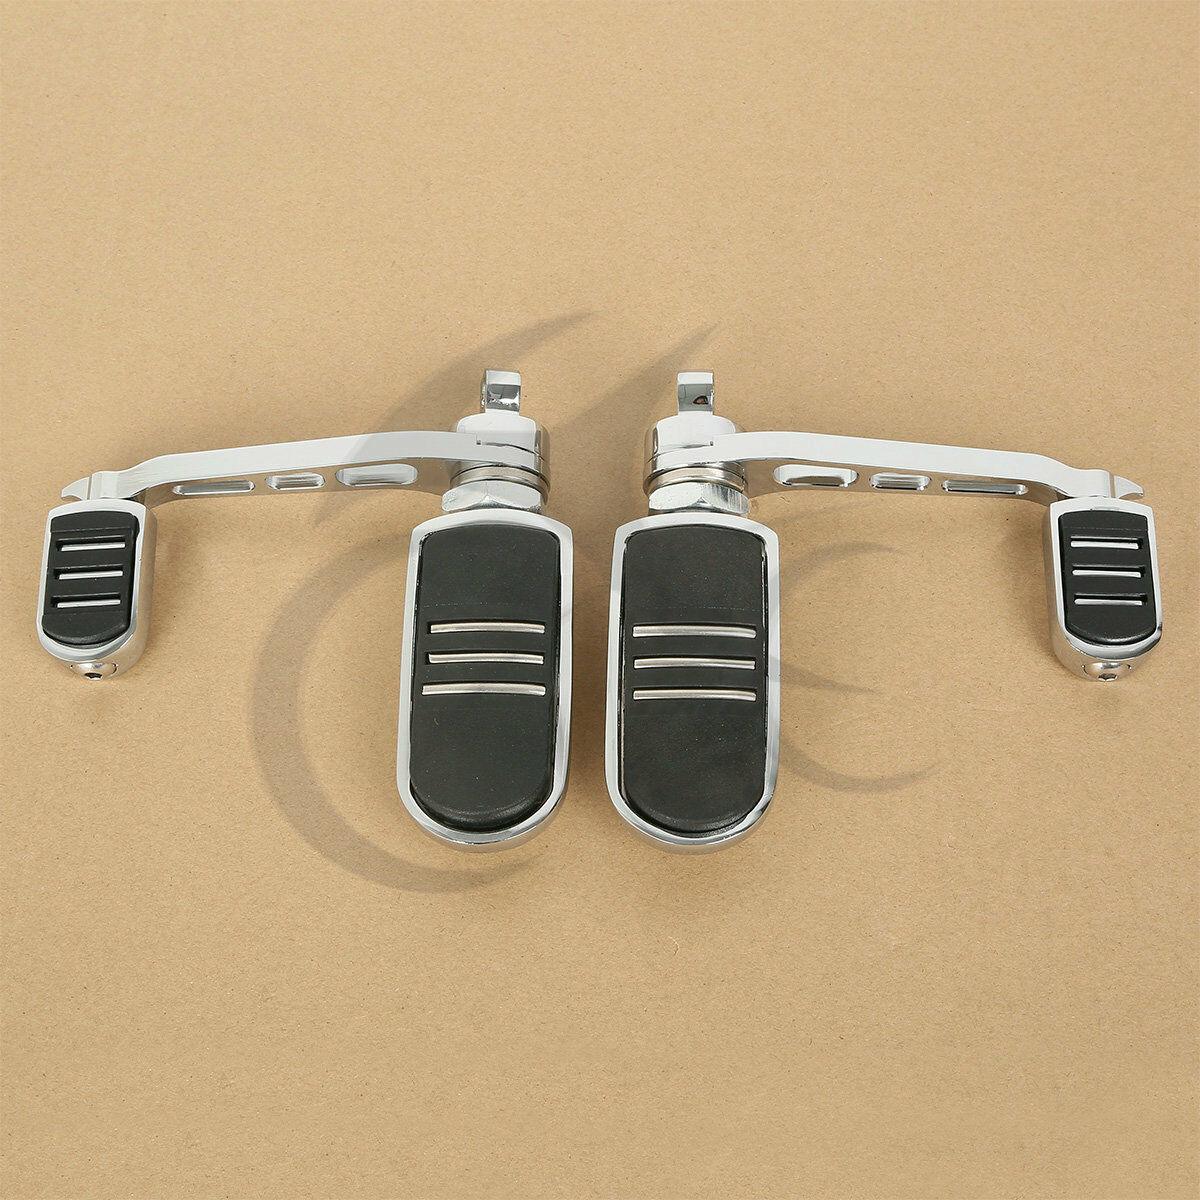 Pair Foot Pegs With Heel Rest Fit For Harley Sportster XL 883 1200 Iron Softail - Moto Life Products